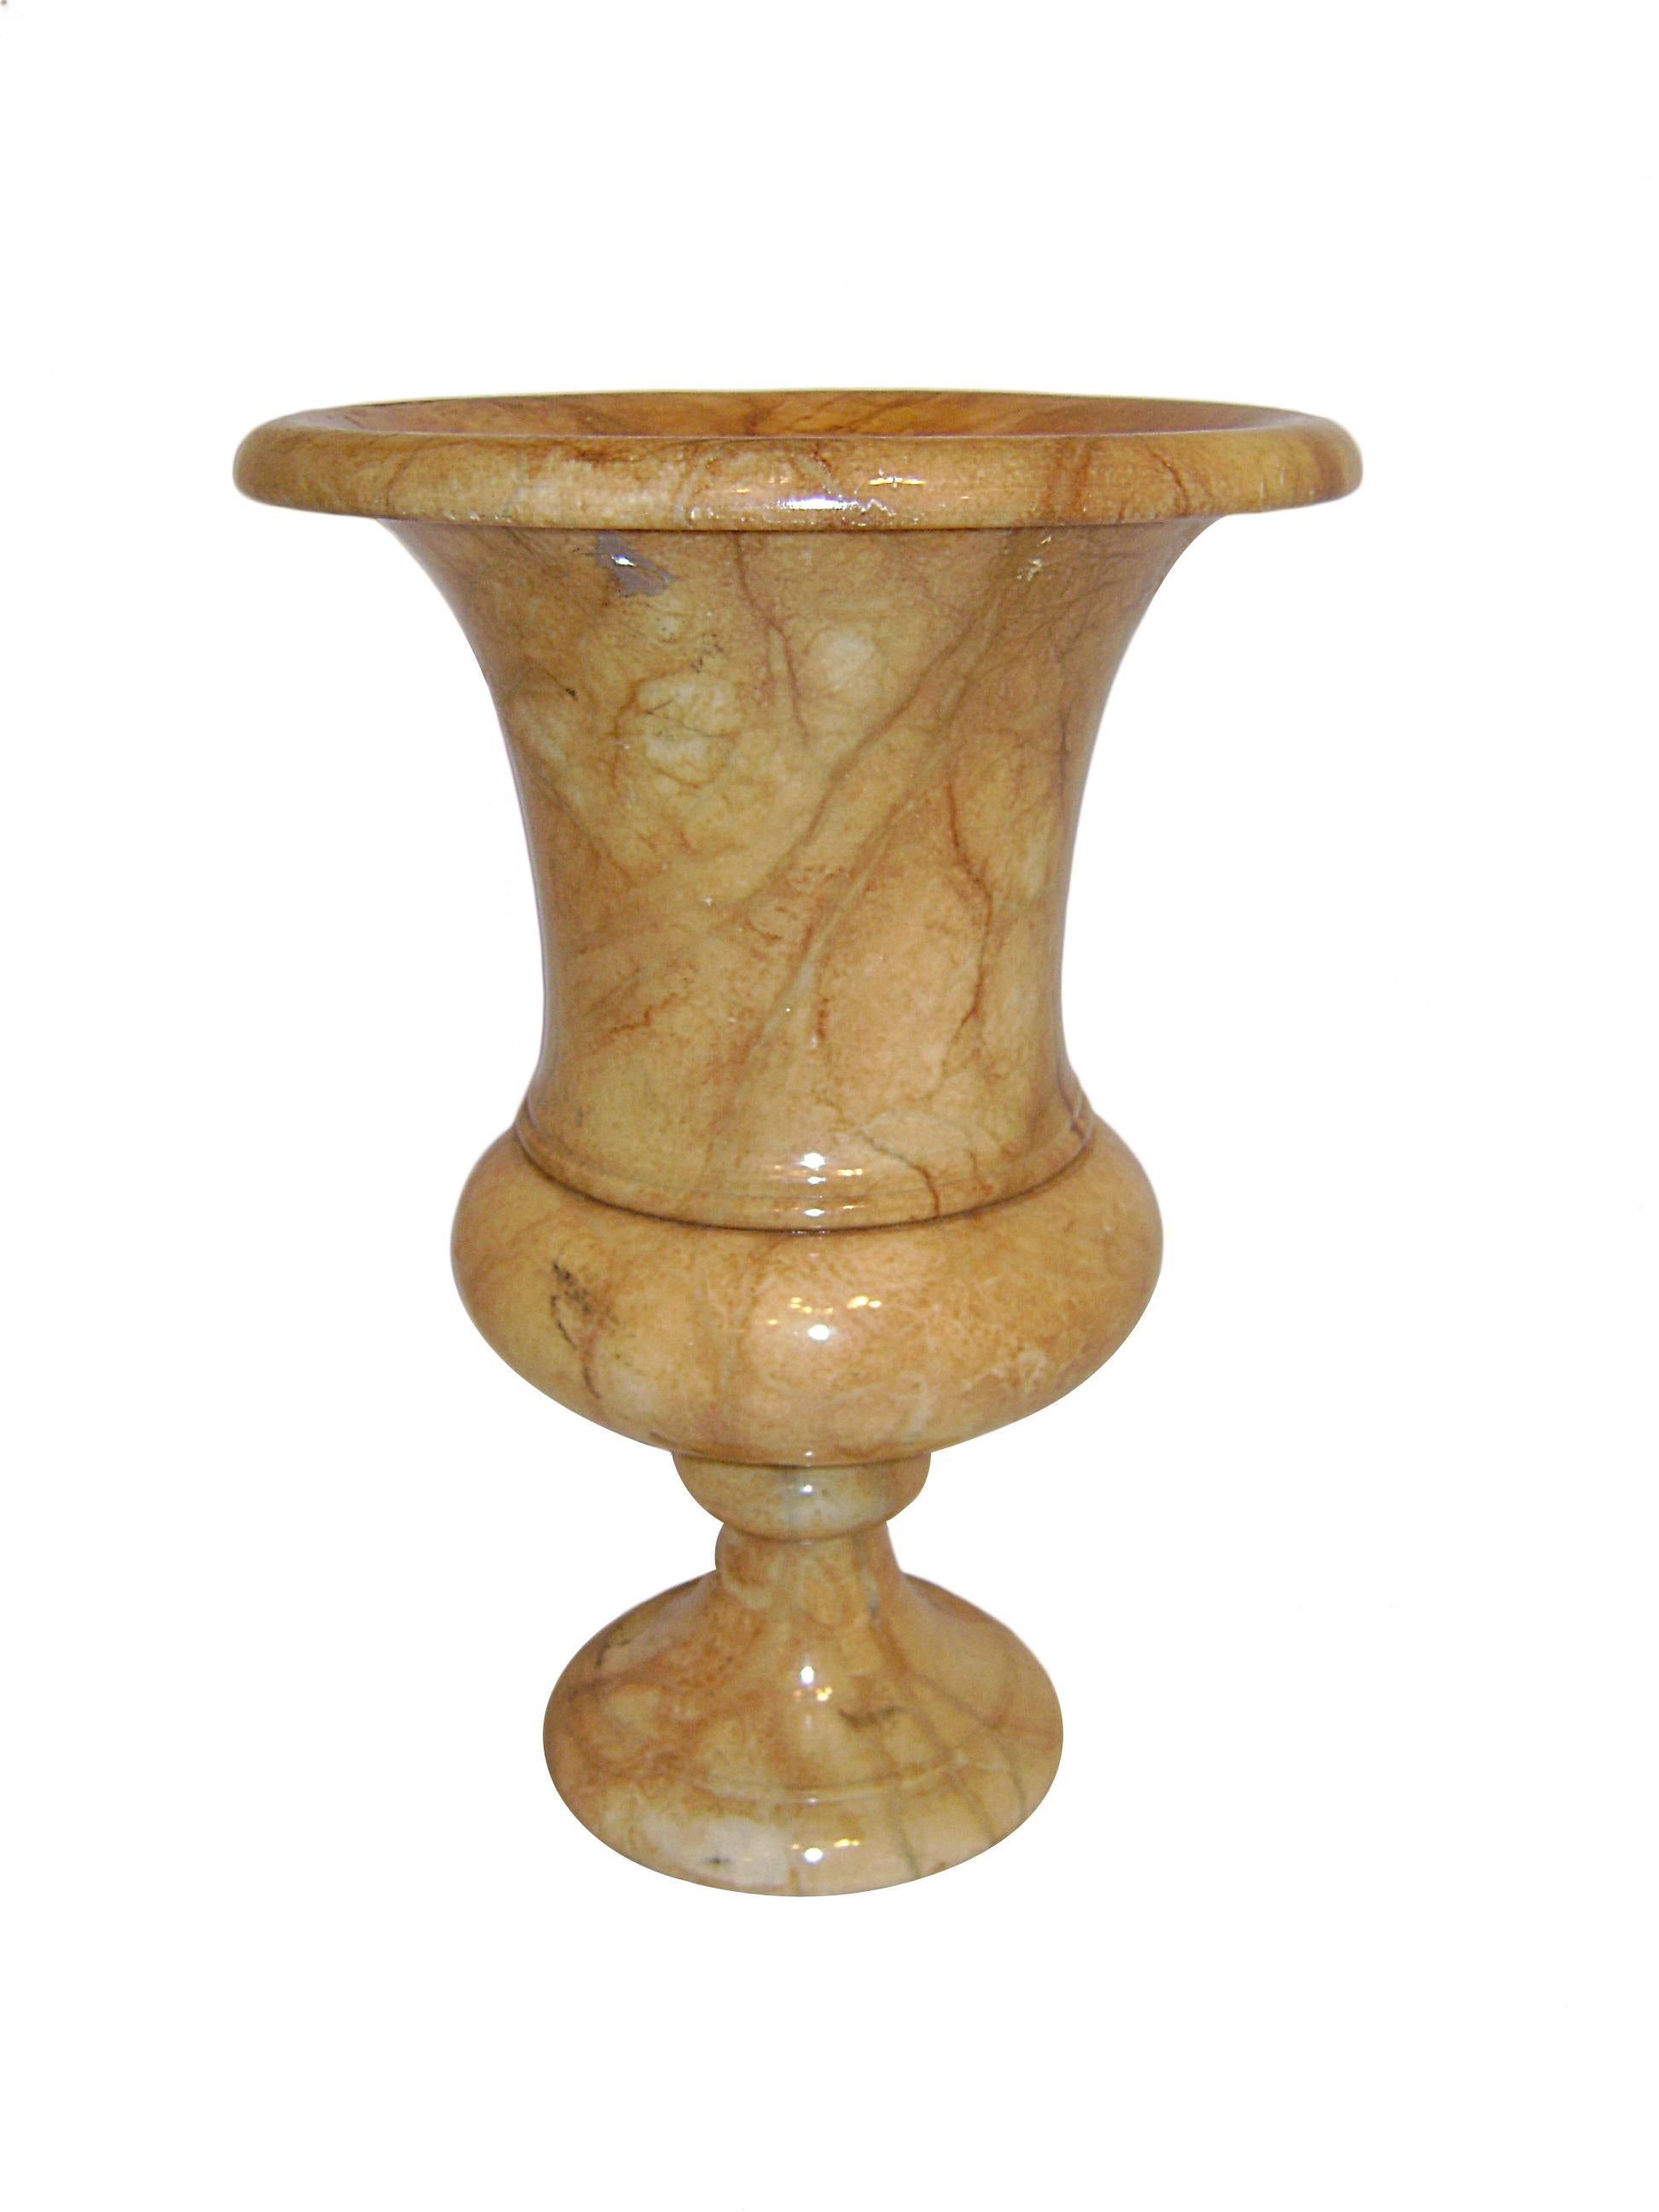 A circa 1920's Italian single carved alabaster urn table lamp with interior light.

Measurements:
Height: 13.5